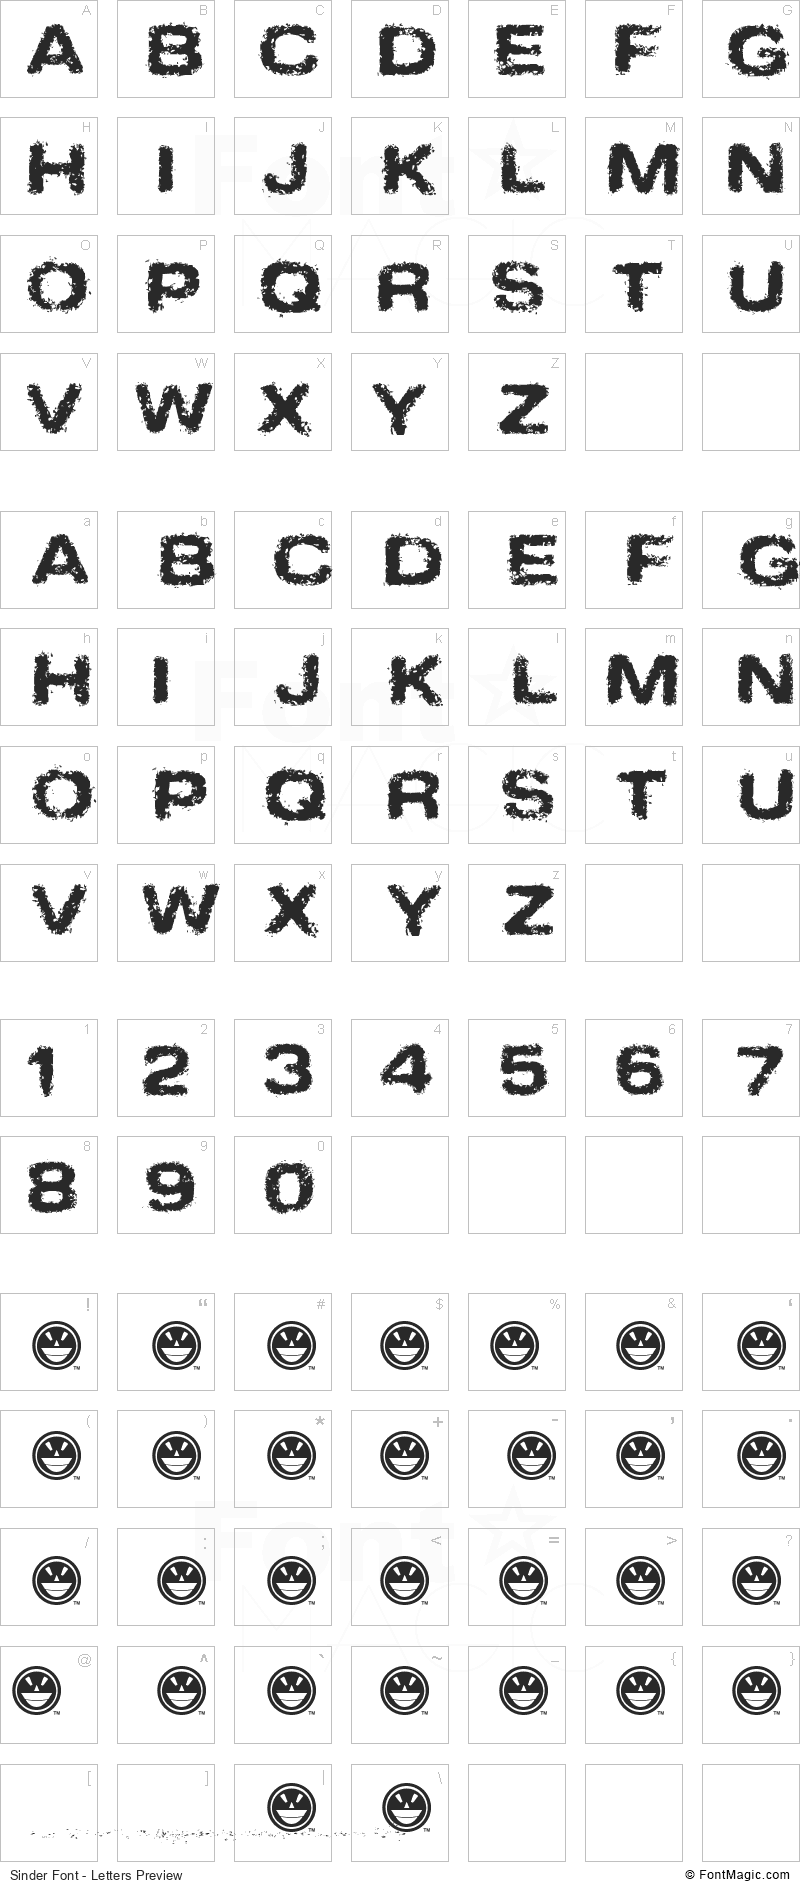 Sinder Font - All Latters Preview Chart